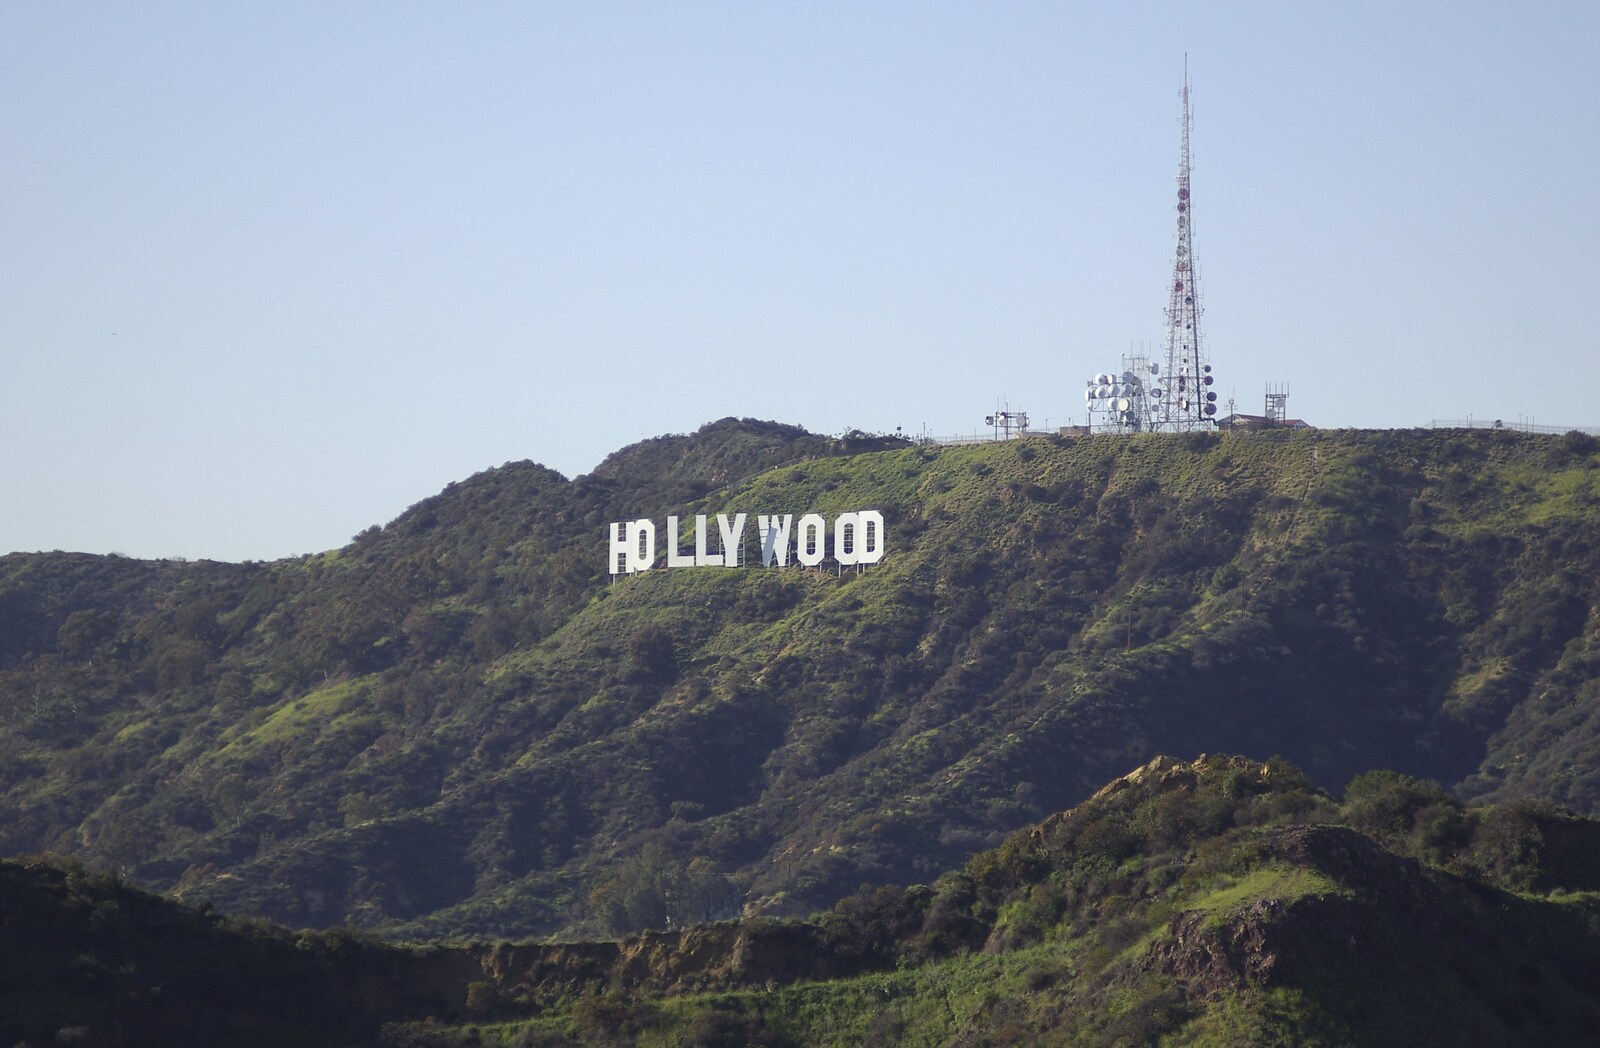 San Diego and Hollywood, California, US - 3rd March 2008: The iconic (but tiny) Hollywood sign